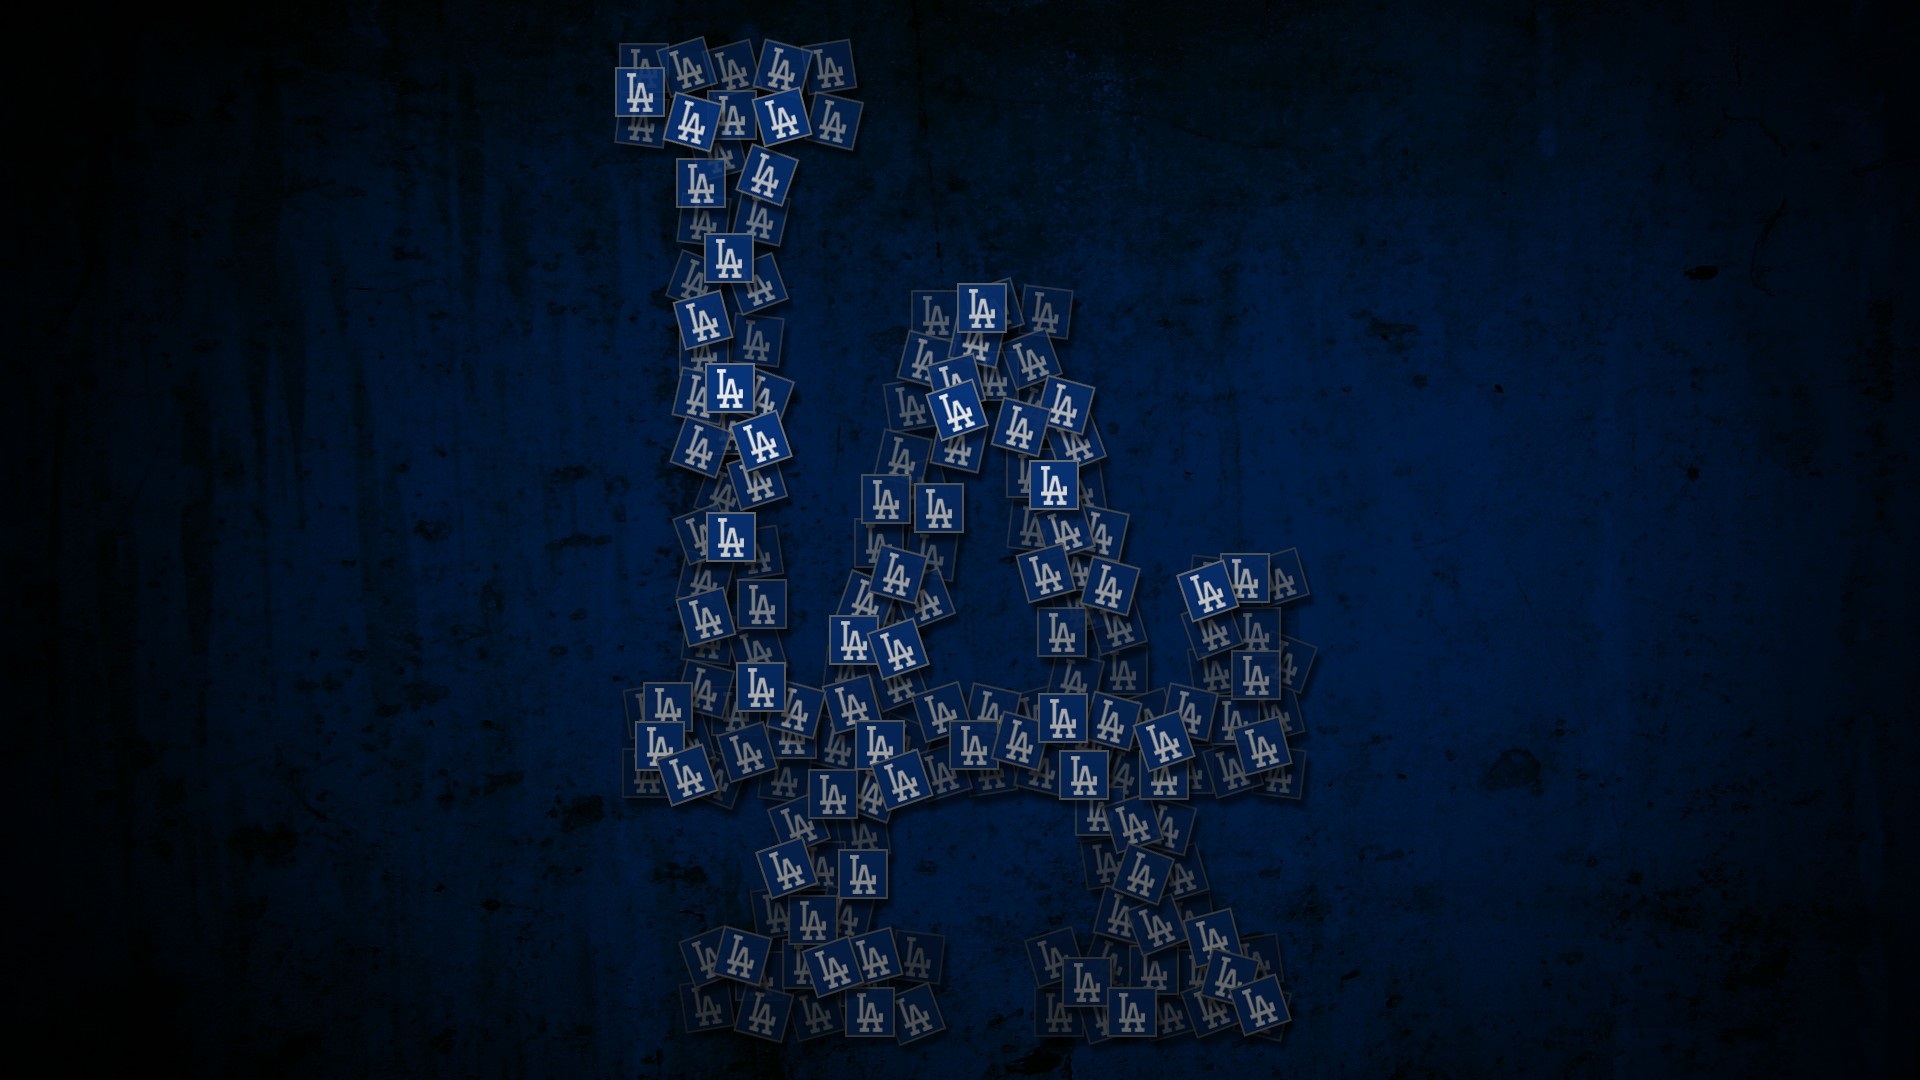 HD Desktop Wallpaper Los Angeles Dodgers MLB With high-resolution 1920X1080 pixel. You can use this wallpaper for Mac Desktop Wallpaper, Laptop Screensavers, Android Wallpapers, Tablet or iPhone Home Screen and another mobile phone device